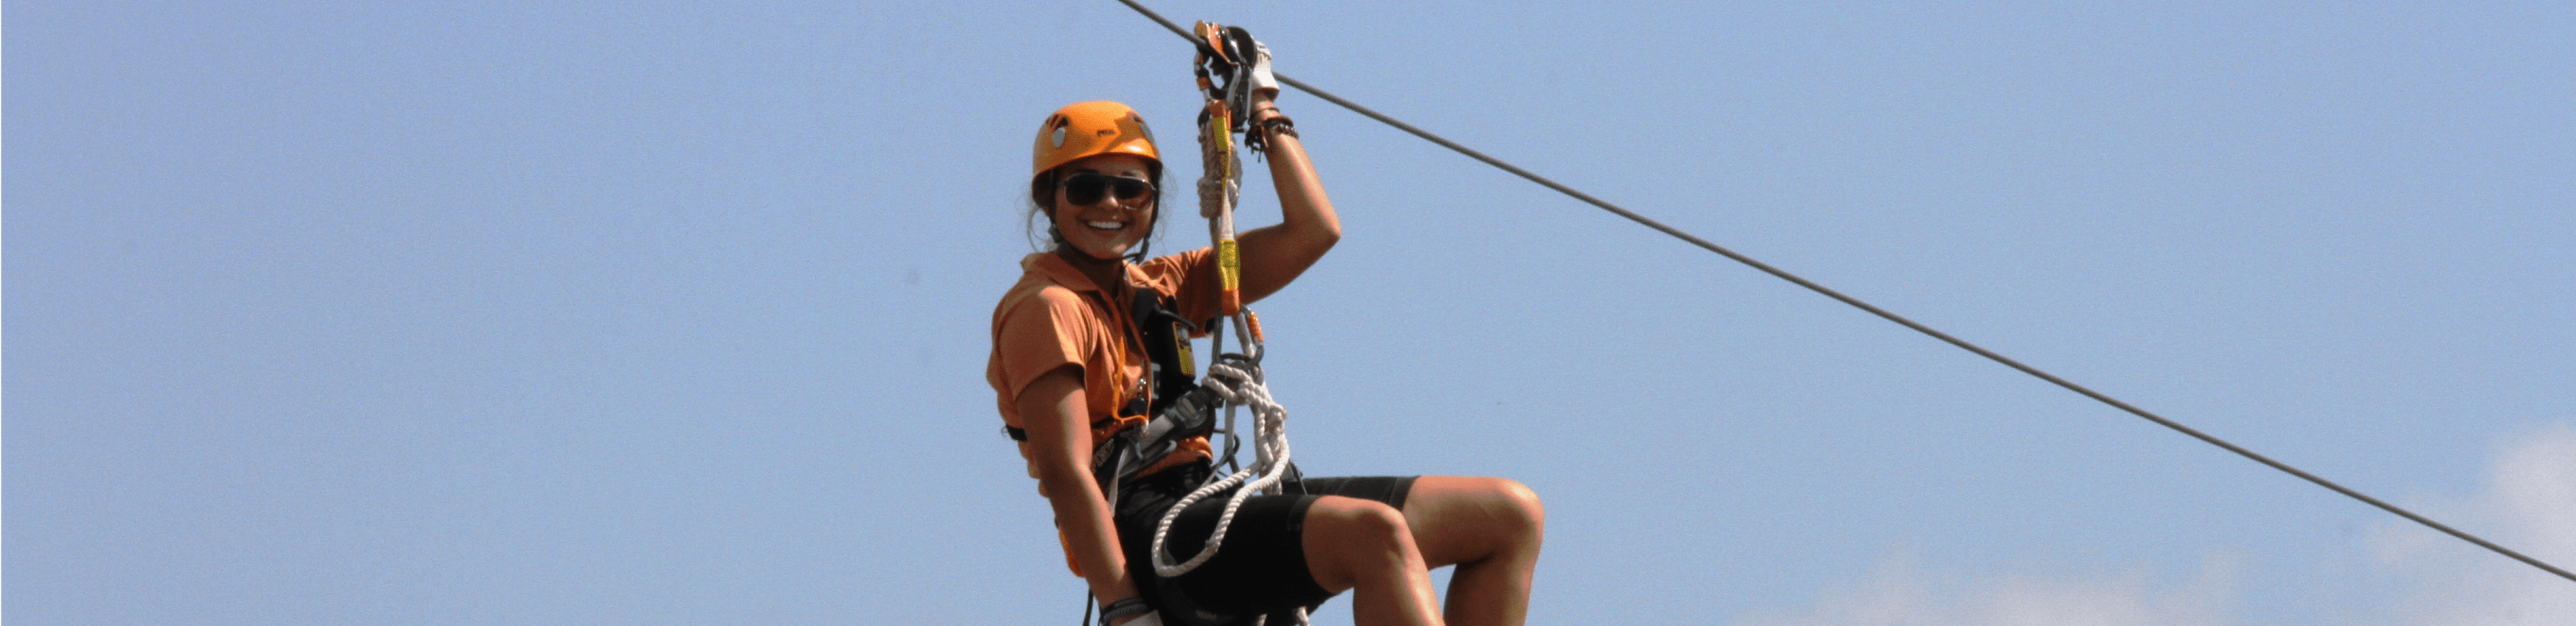 person on zip line smiling for the camera